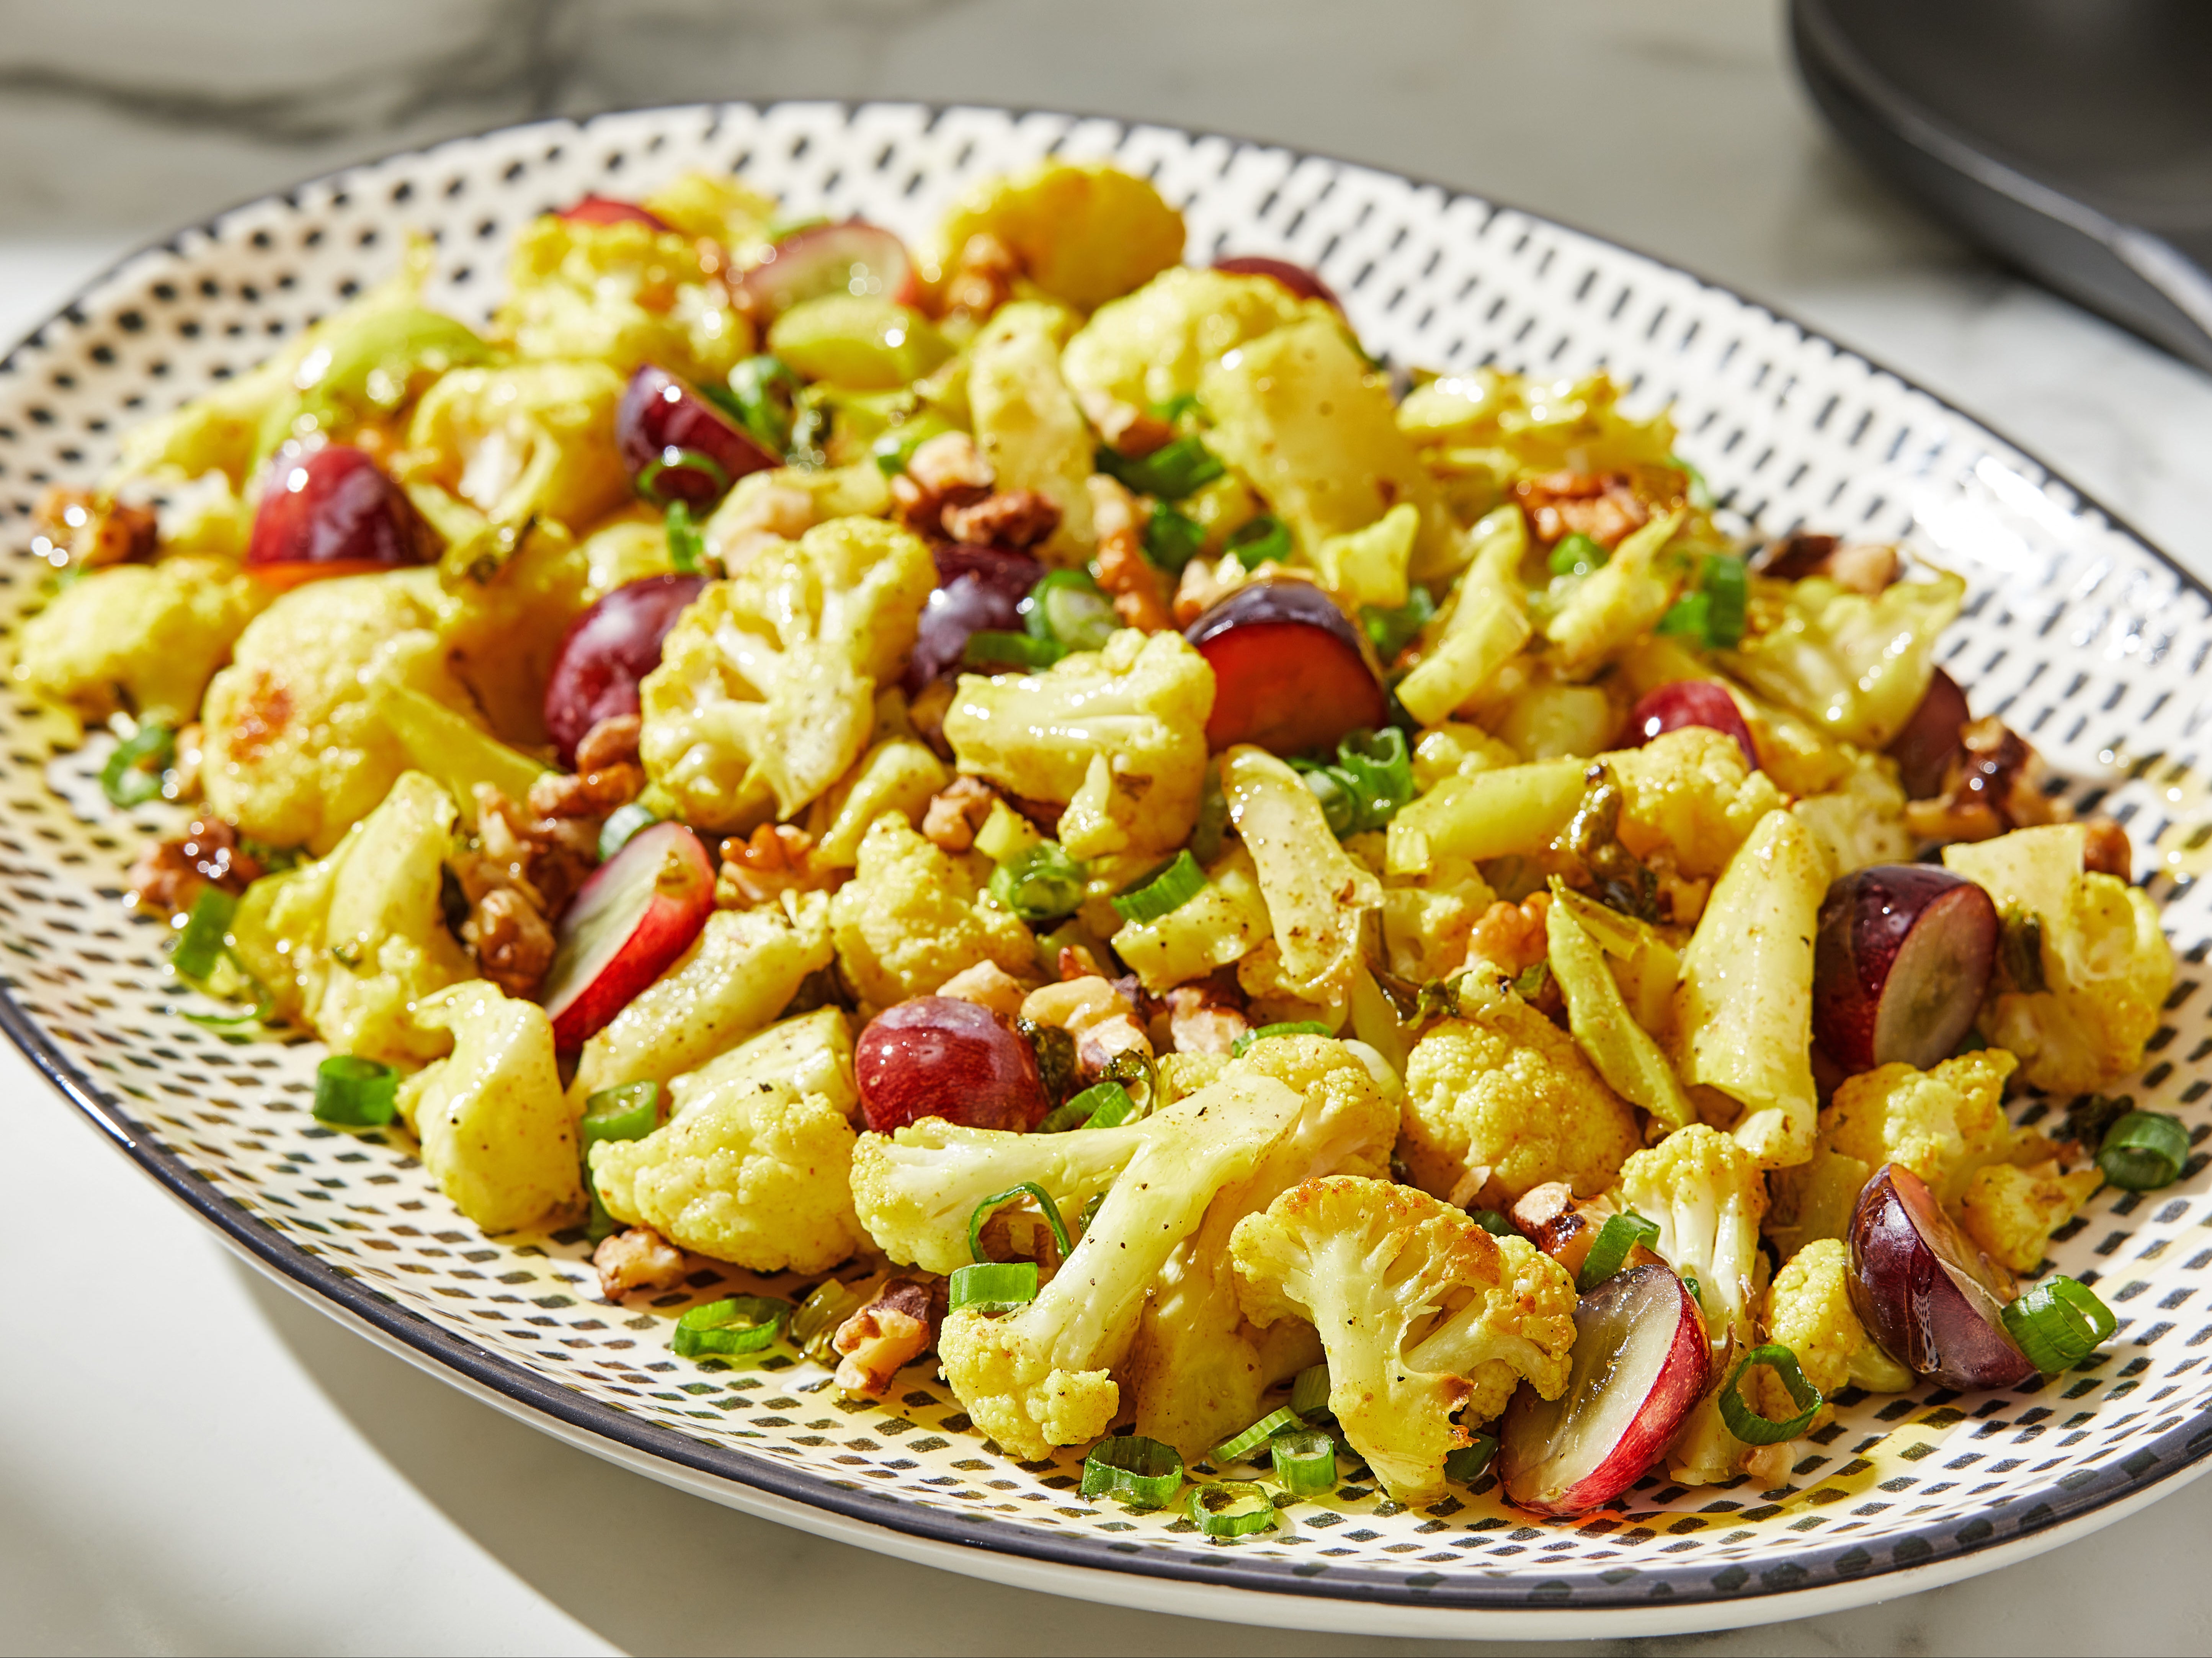 A plant-based, lightened-up take on a curried chicken salad